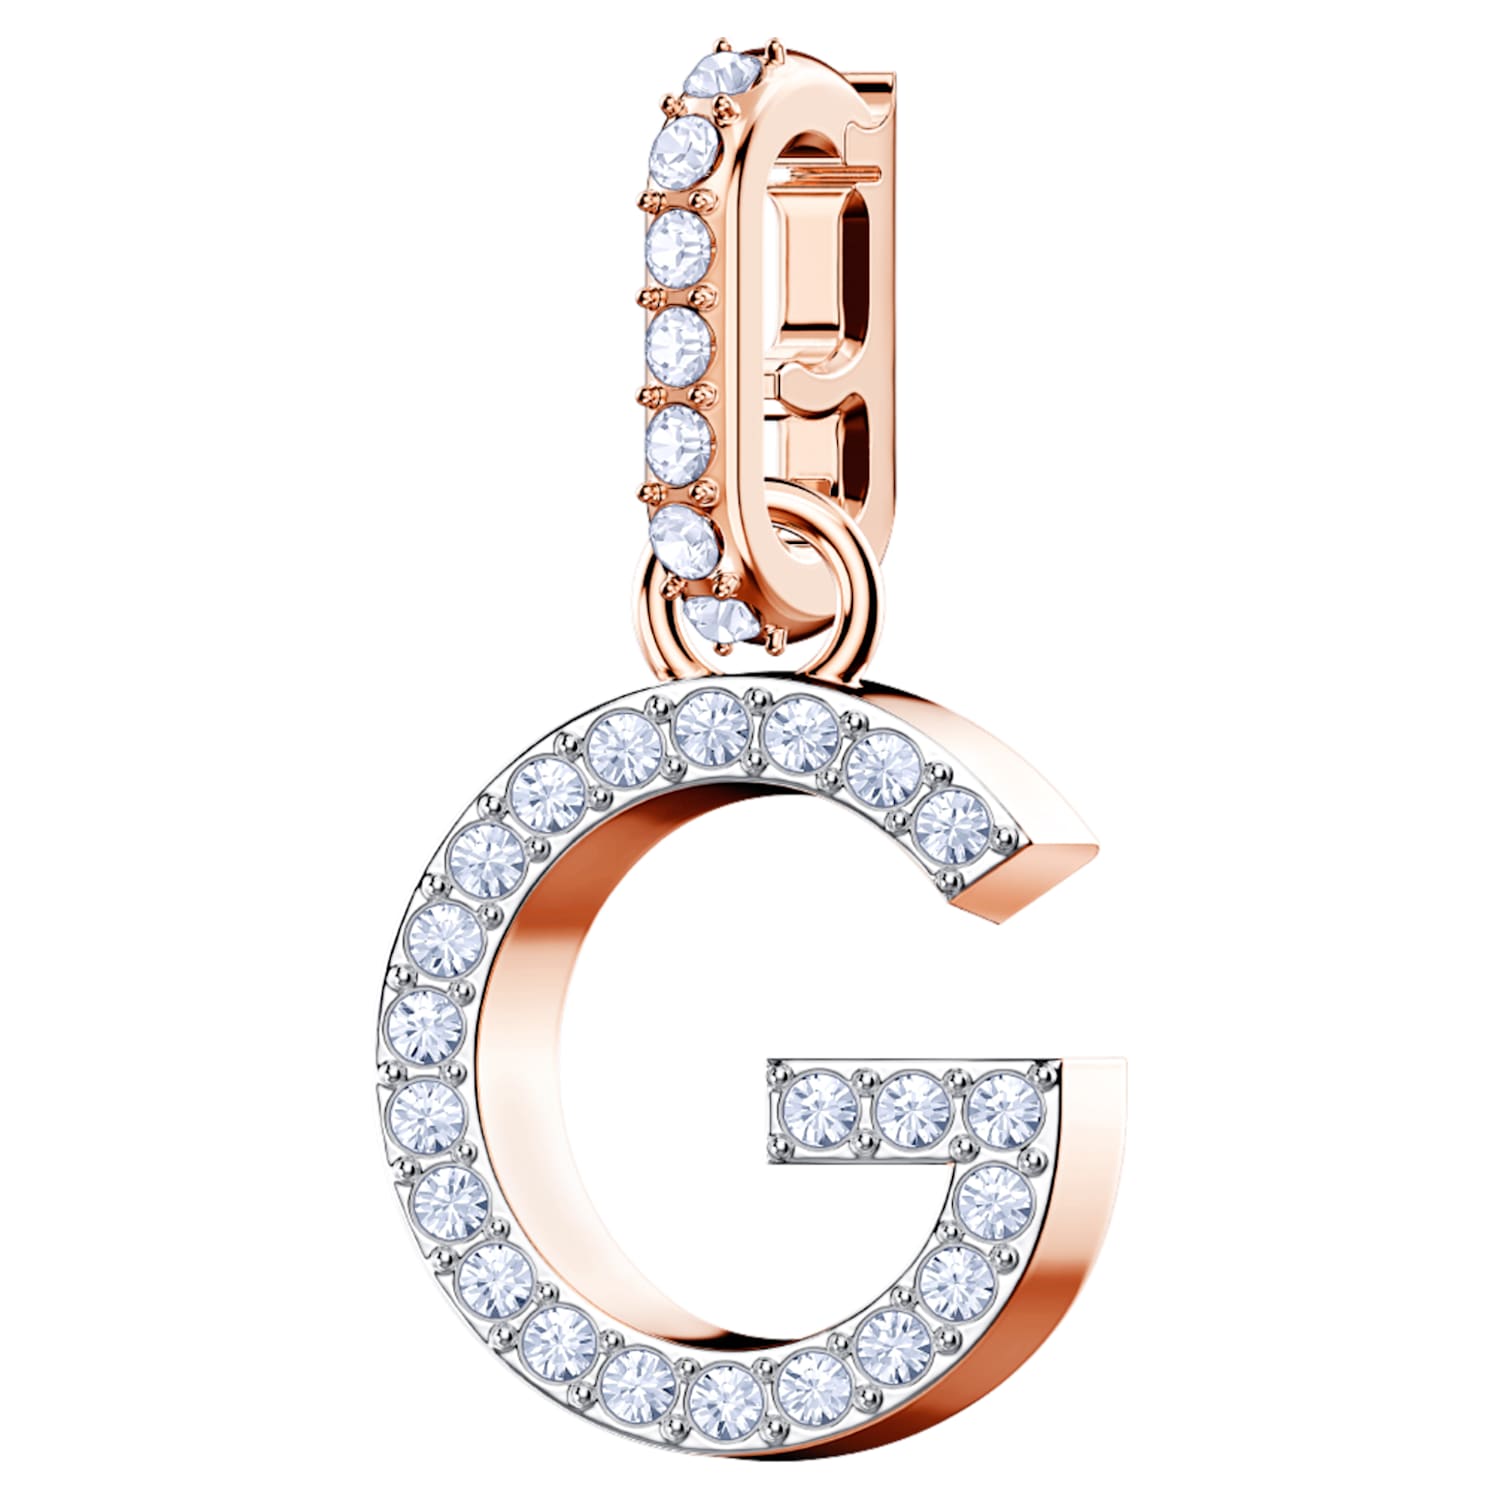 Swarovski Remix Collection Charm G, White, Rose-gold tone plated